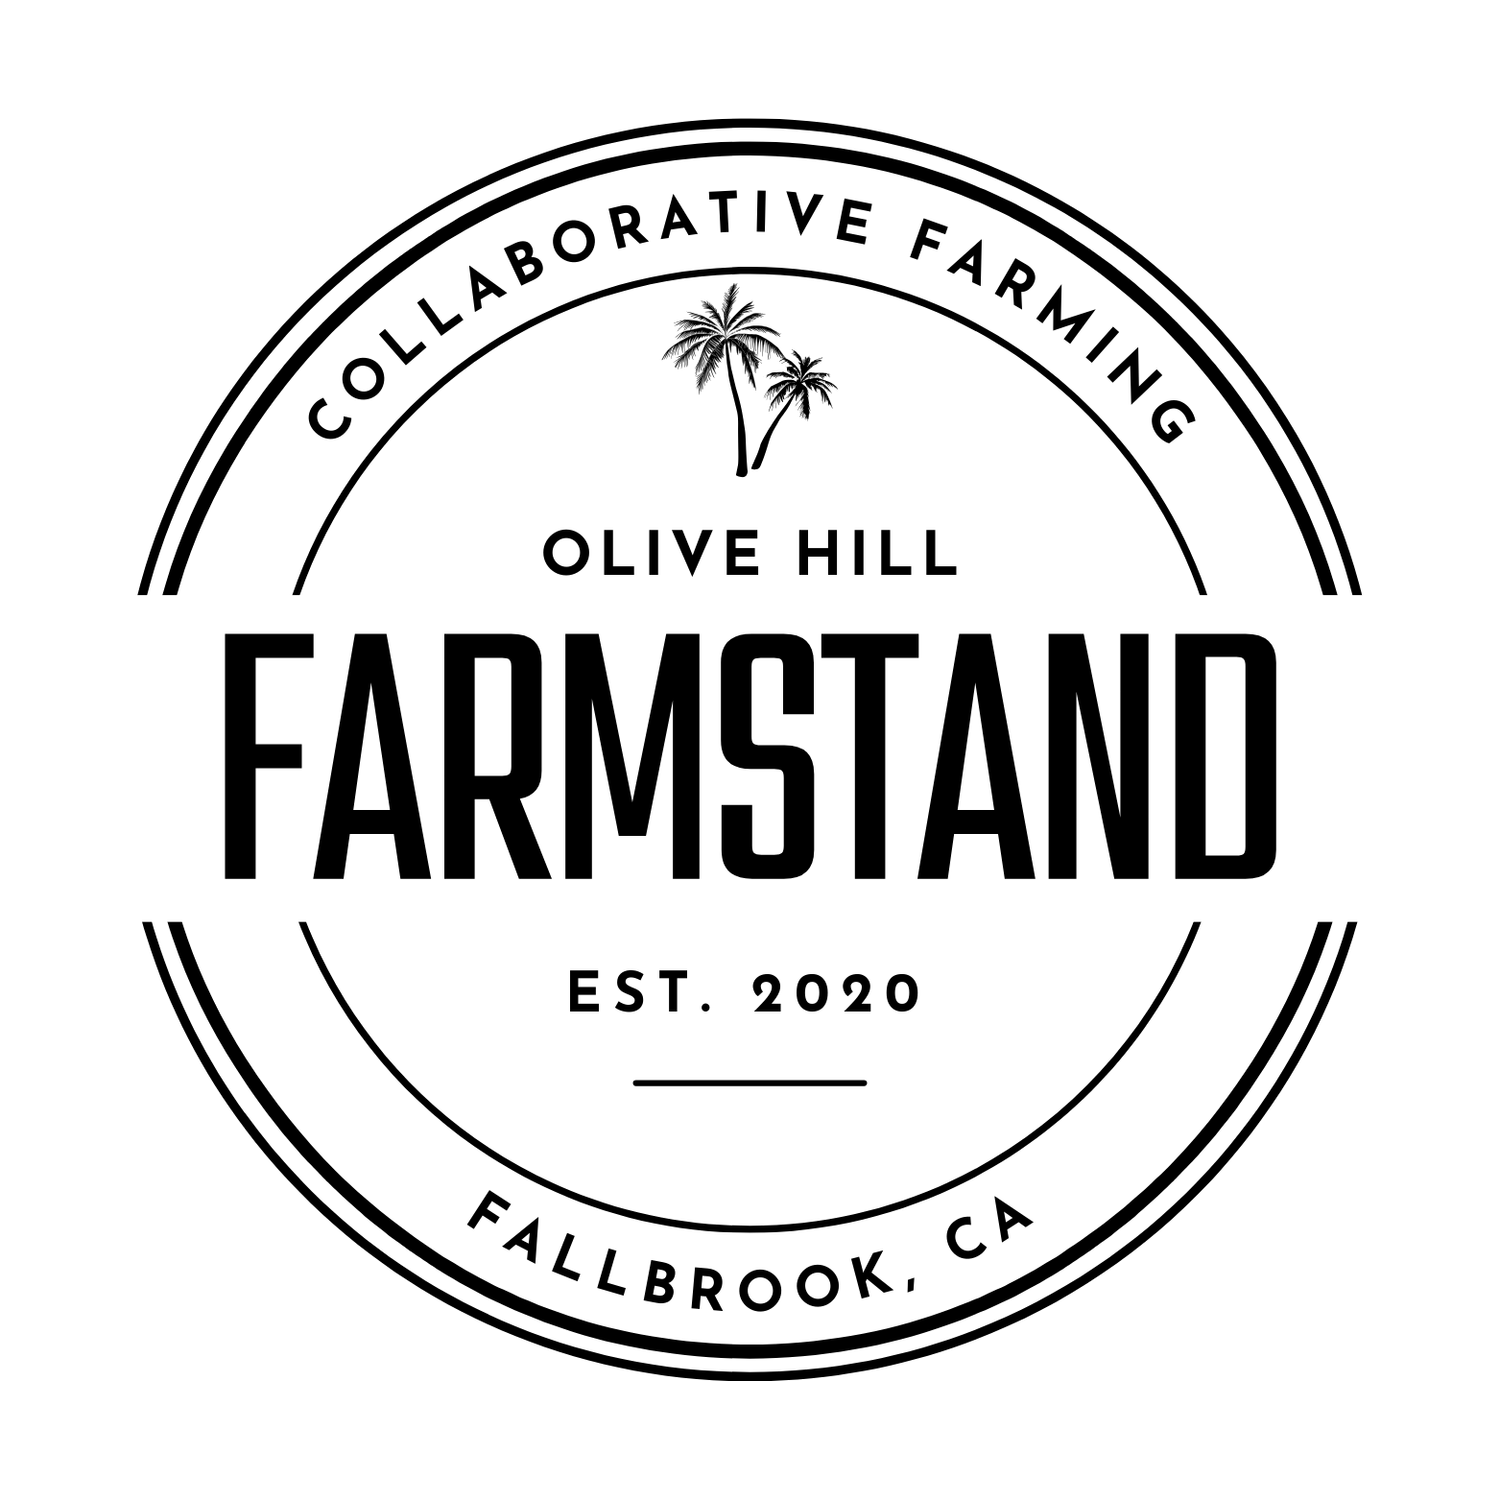 The Farm Stand on Olive Hill